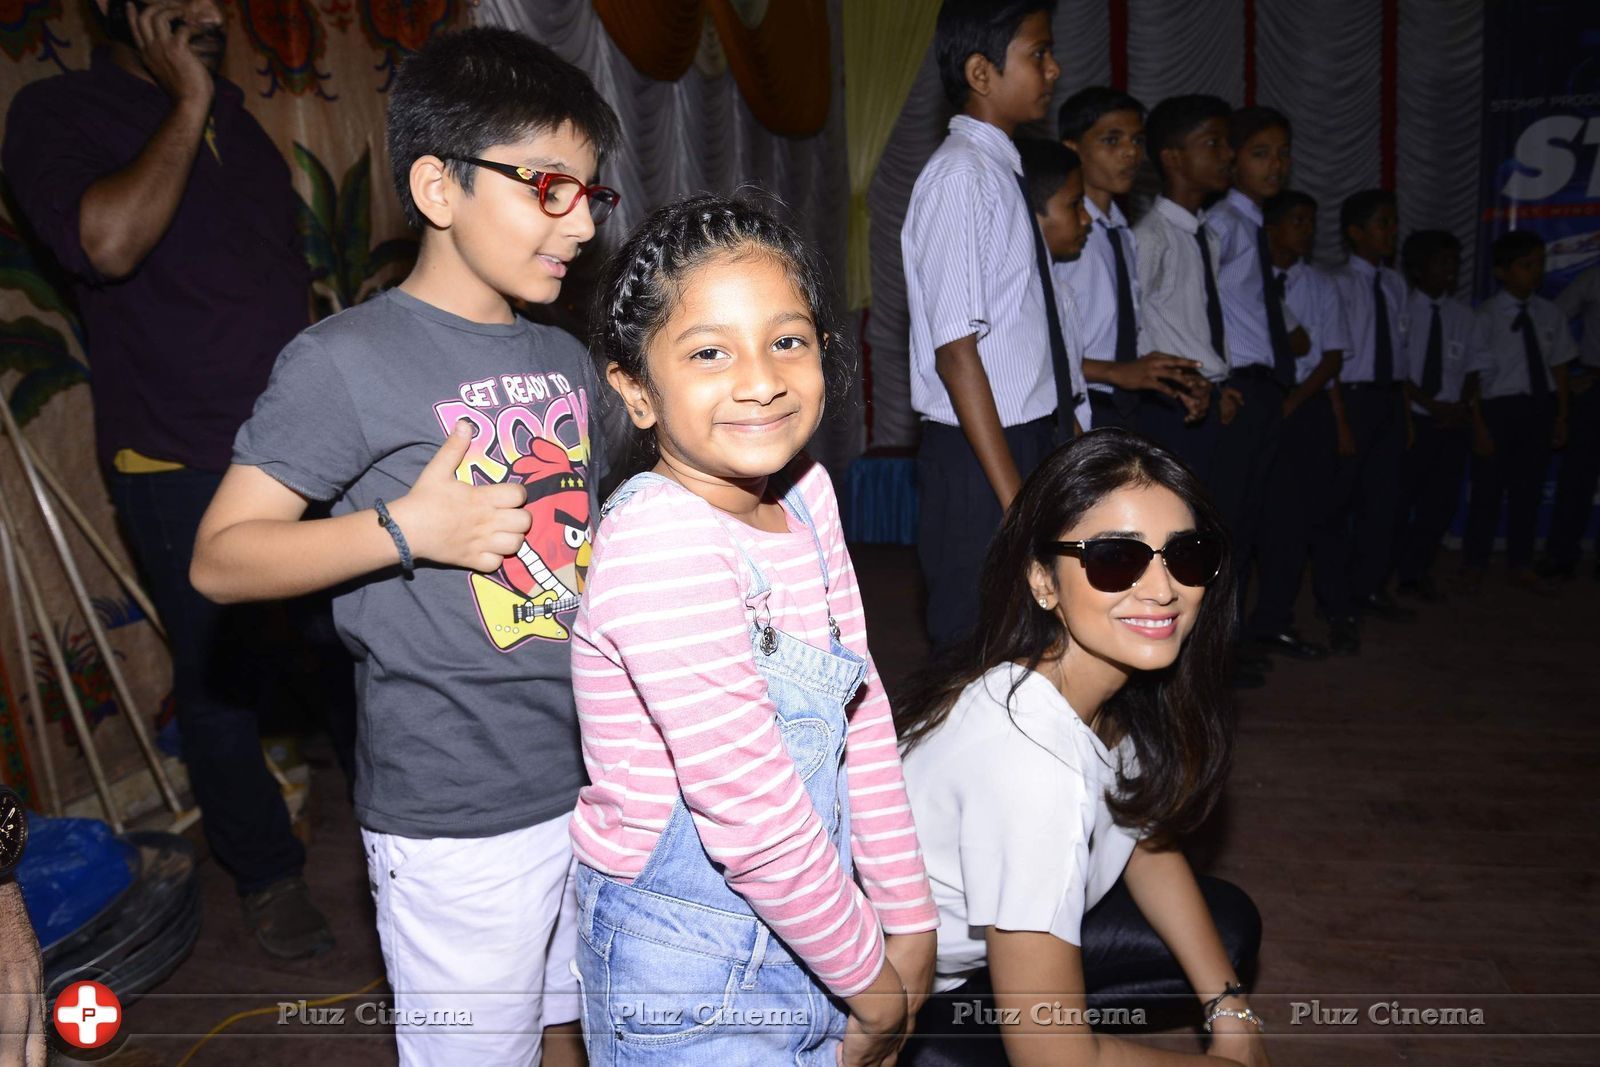 AGP World CSR initiative with BMC Students Pictures | Picture 1450039